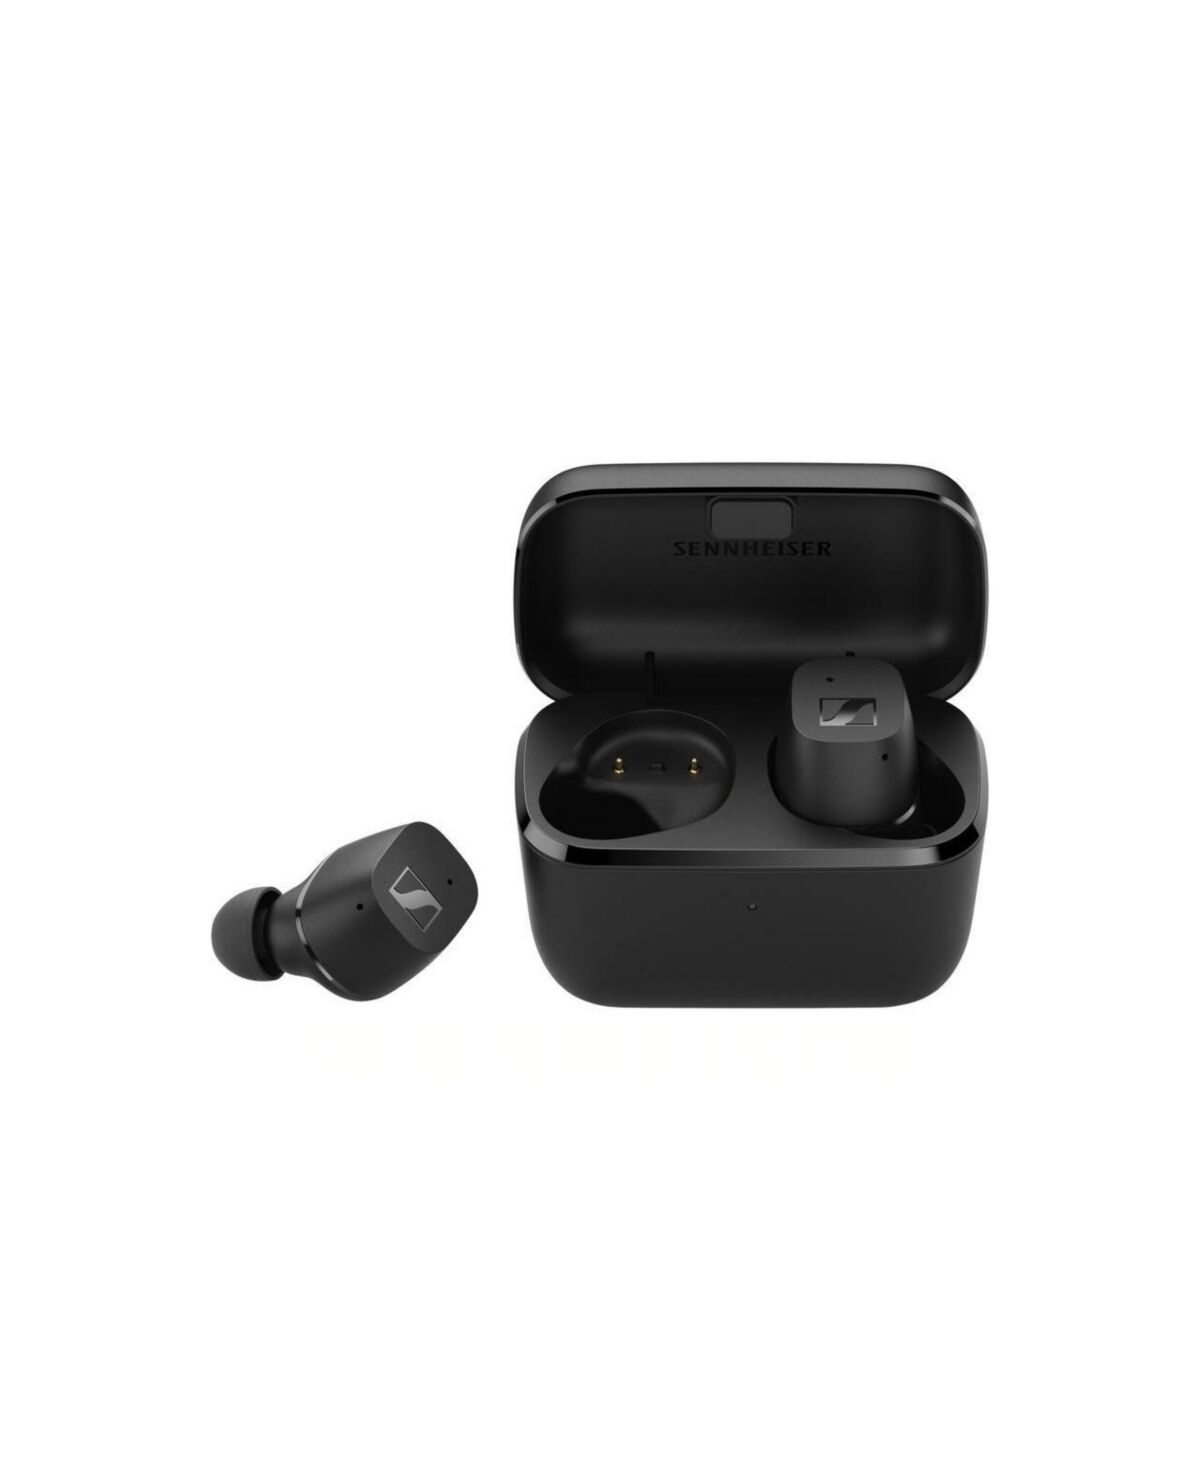 Sennheiser Cx True Wireless Earbuds - Bluetooth In-Ear Headphones for Music and Calls with Passive Noise Cancellation, Customizable Touch Controls, Ba